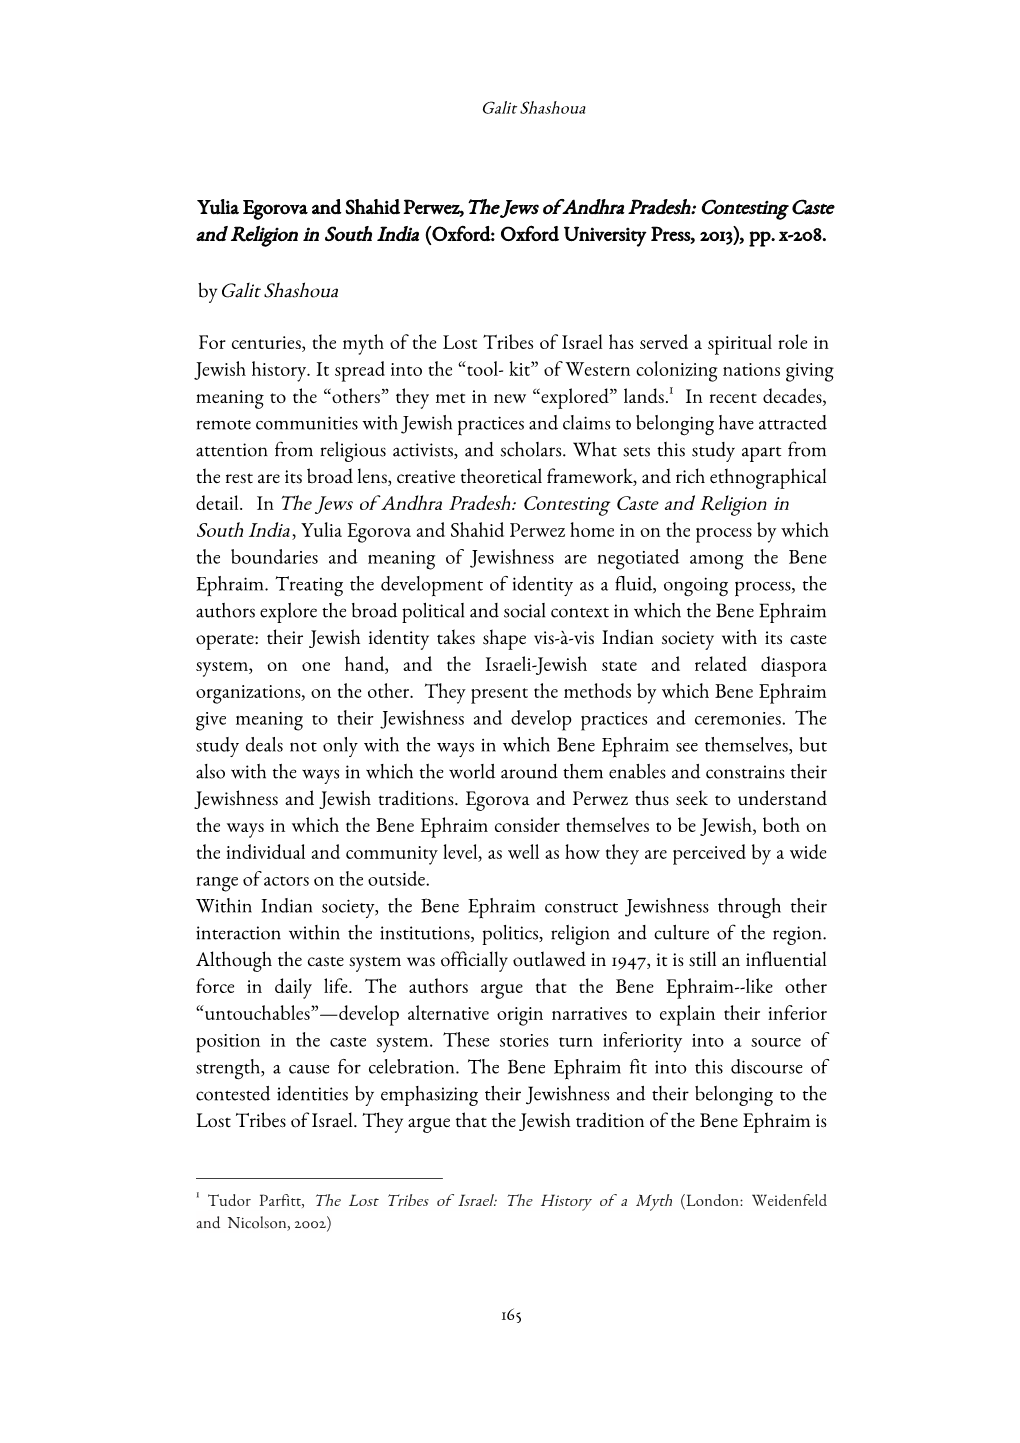 Yulia Egorova and Shahid Perwez, the Jews of Andhra Pradesh: Contesting Caste and Religion in South India (Oxford: Oxford University Press, 2013), Pp